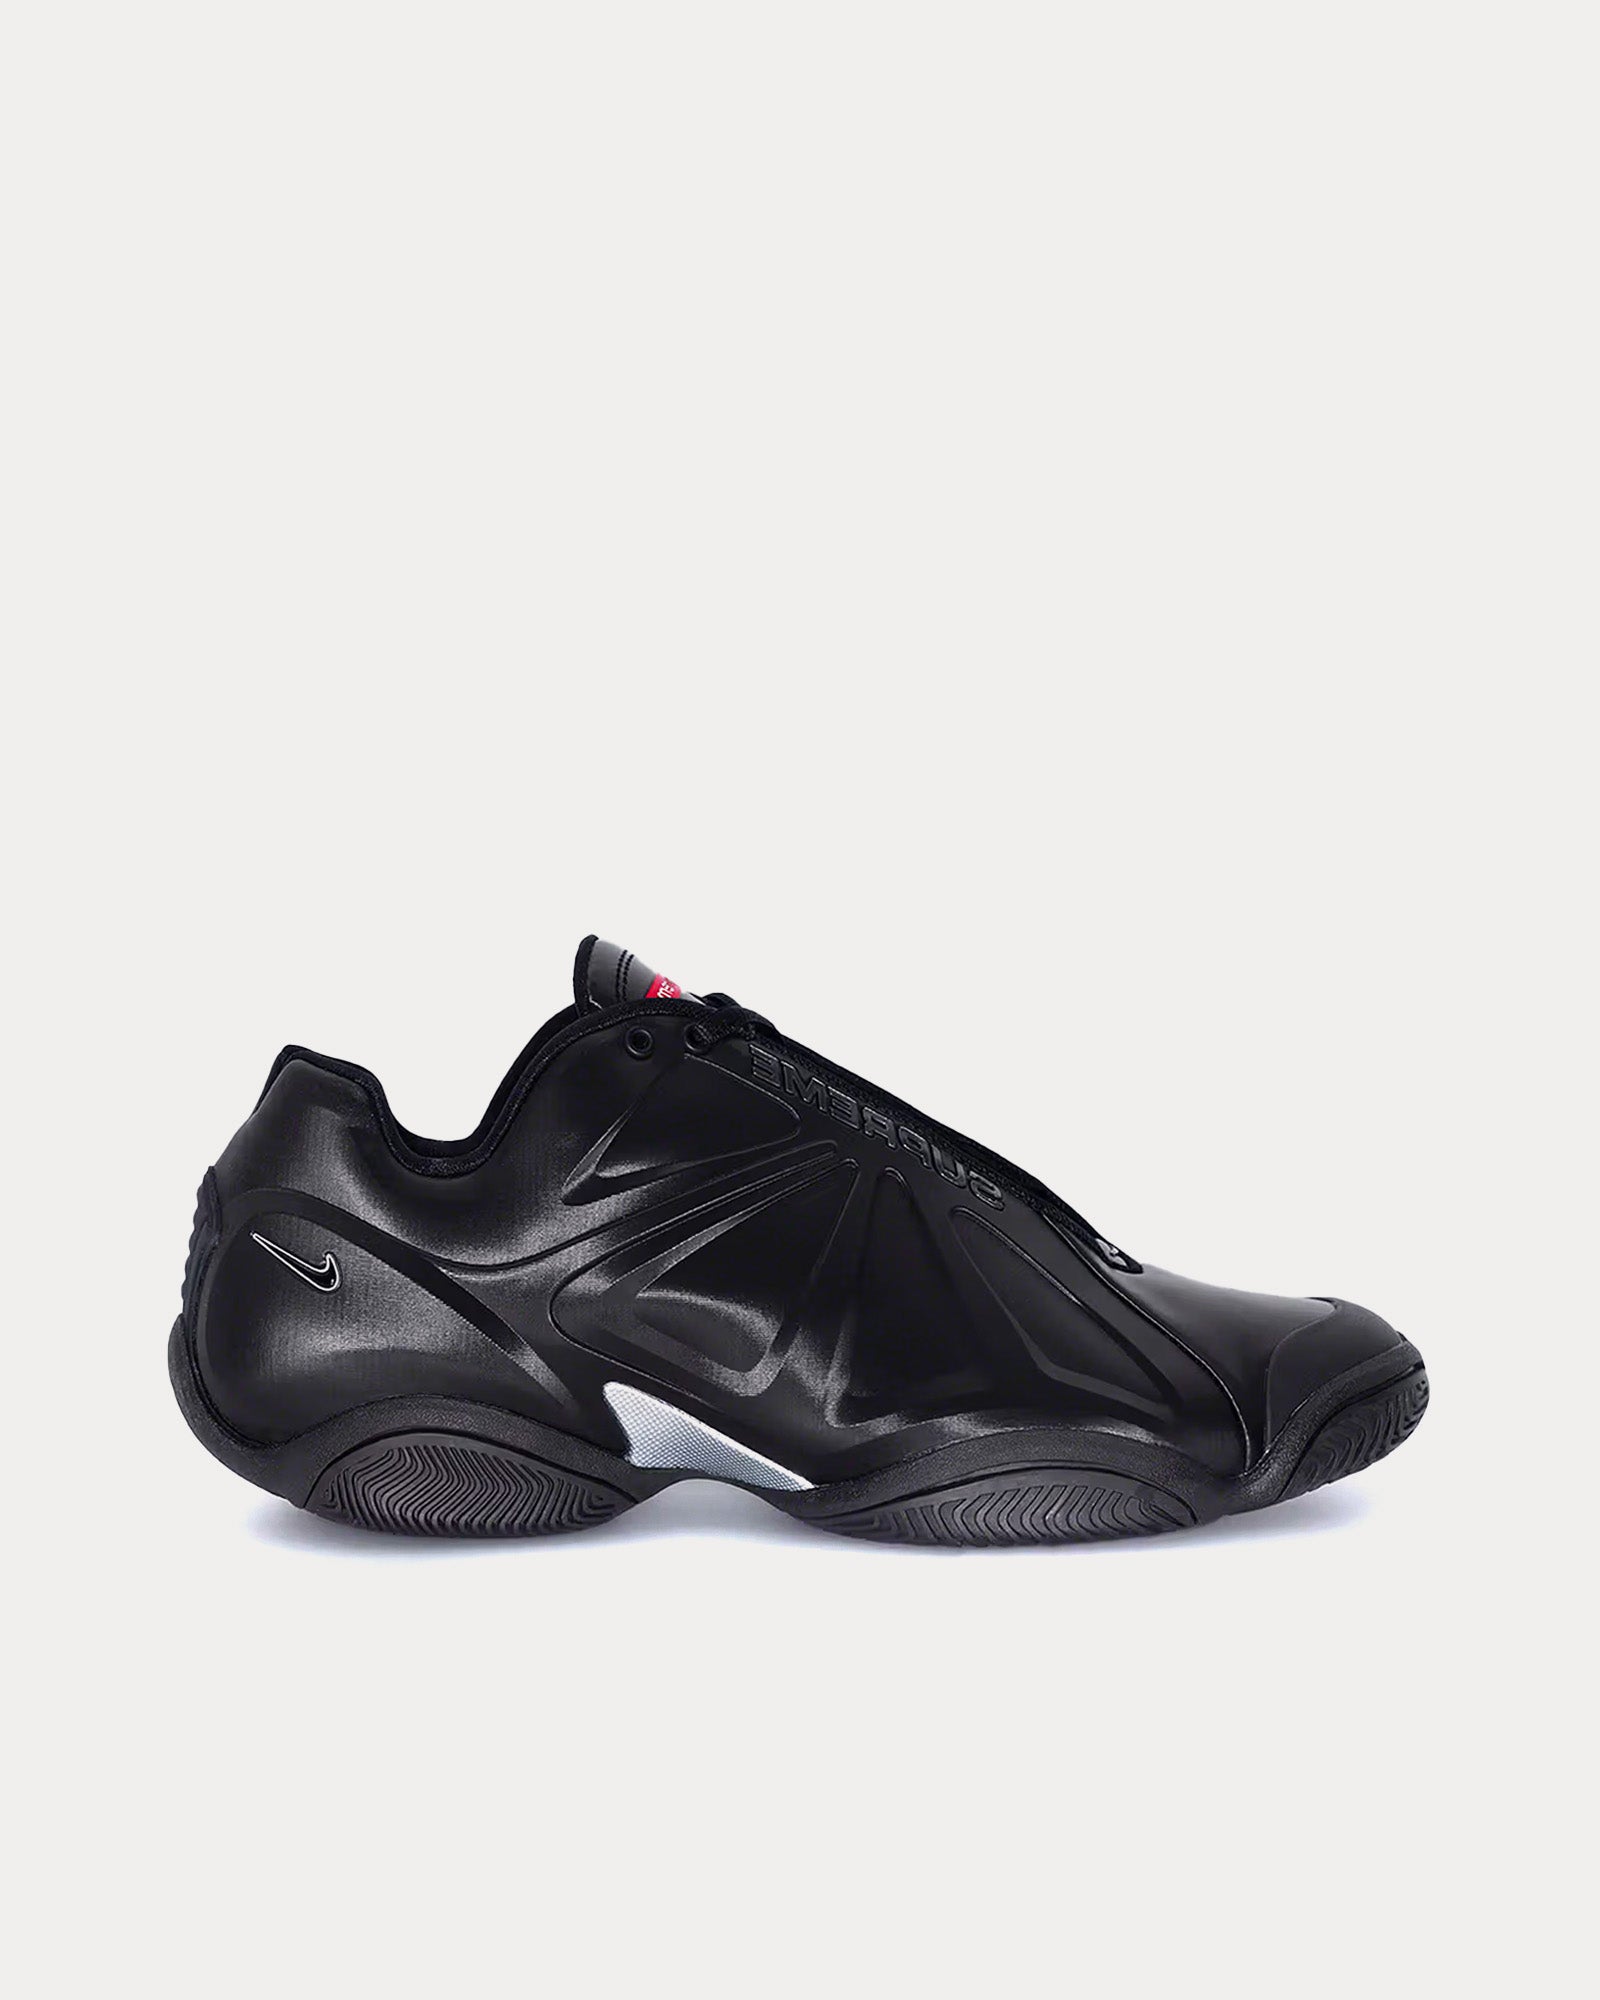 Nike x Supreme - Courtposite Black Low Top Sneakers